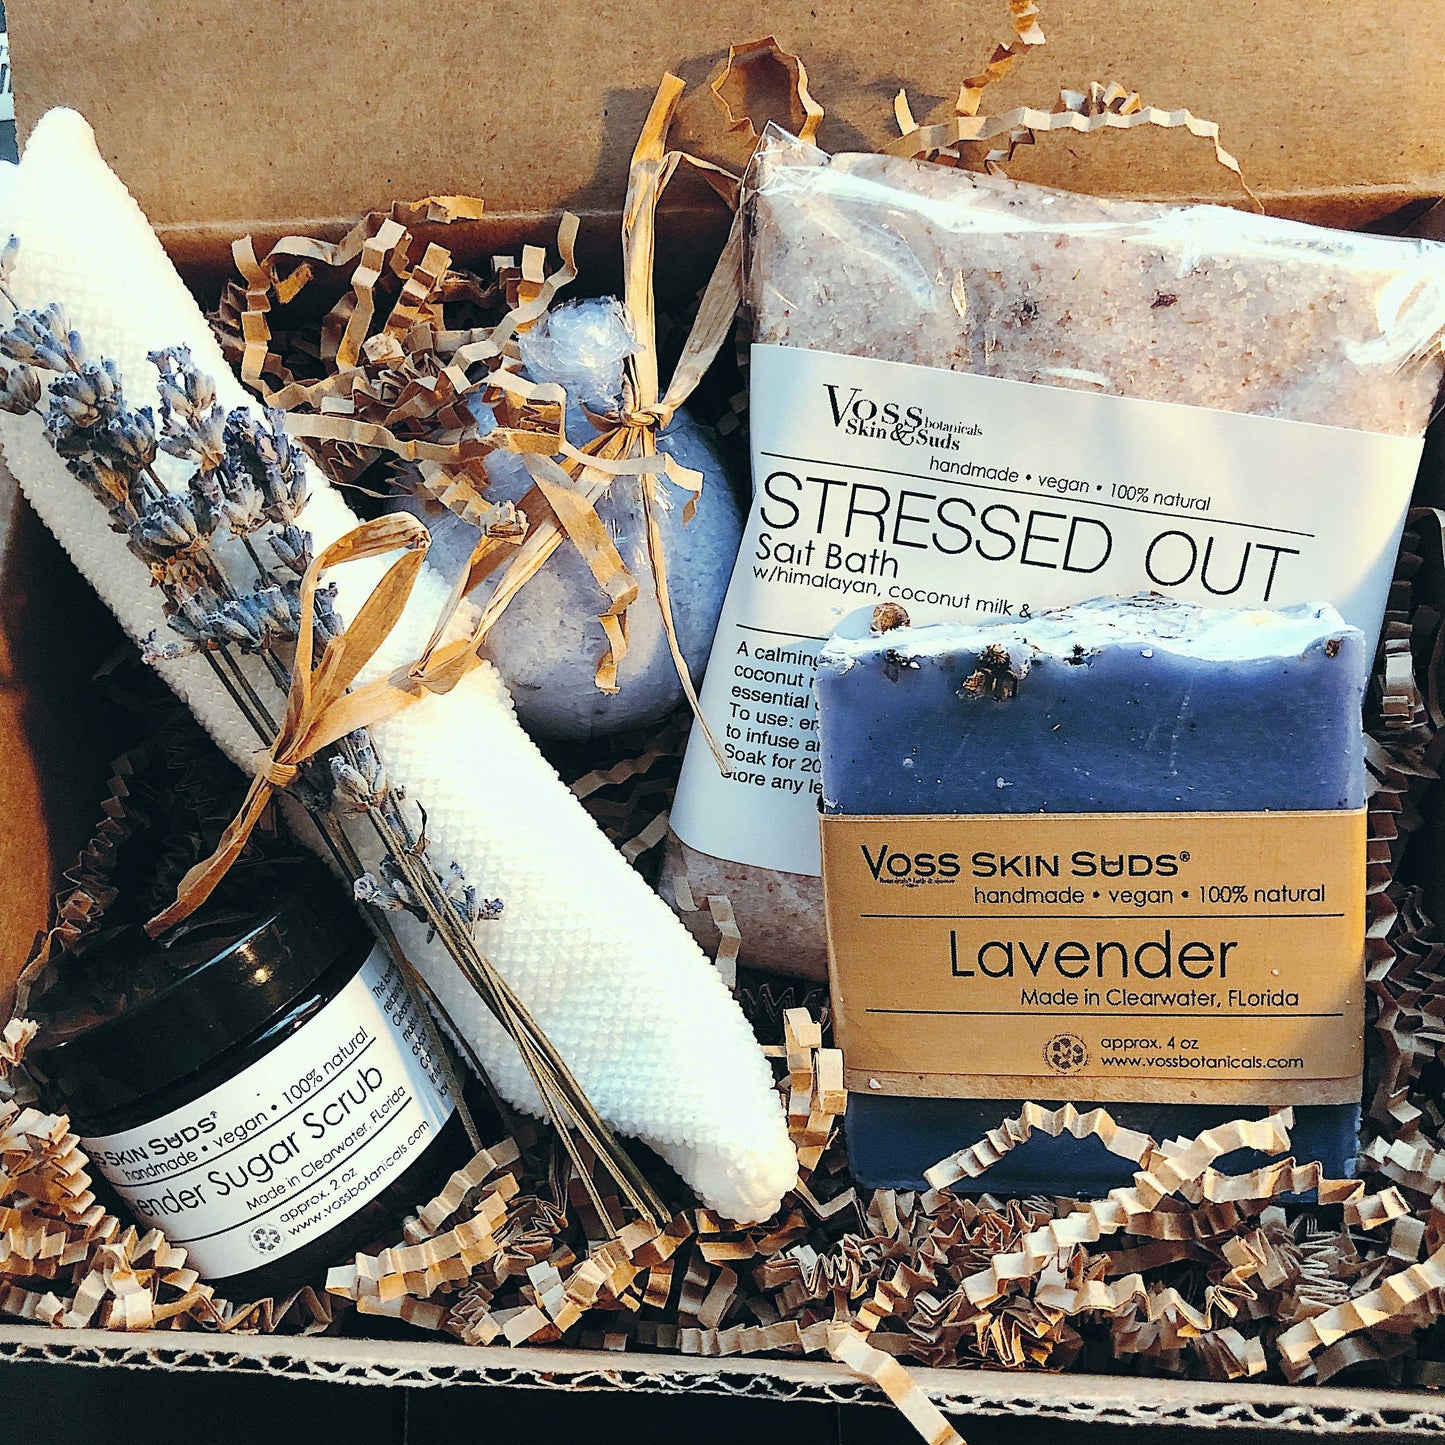 Lavender Spa Gift Box PRODUCT FOOTPRINTS Natural ingredients Phthalate, Sulfate, Petroleum & Paraben Free Vegan Free of Synthetic Fragrances Free of Synthetic Dyes GMO & Gluten-free Non Toxic Handmade Sustainable Innovation Made in the USA Cruelty Free Zero Waste Low Carbon Footprint eco friendly   Holiday care package gift box gift for her relaxation gift self care box self care gift box spa gift box spa gift set thank you gift box birthday gift new mom gift relaxing bath set spa gift set spa kit